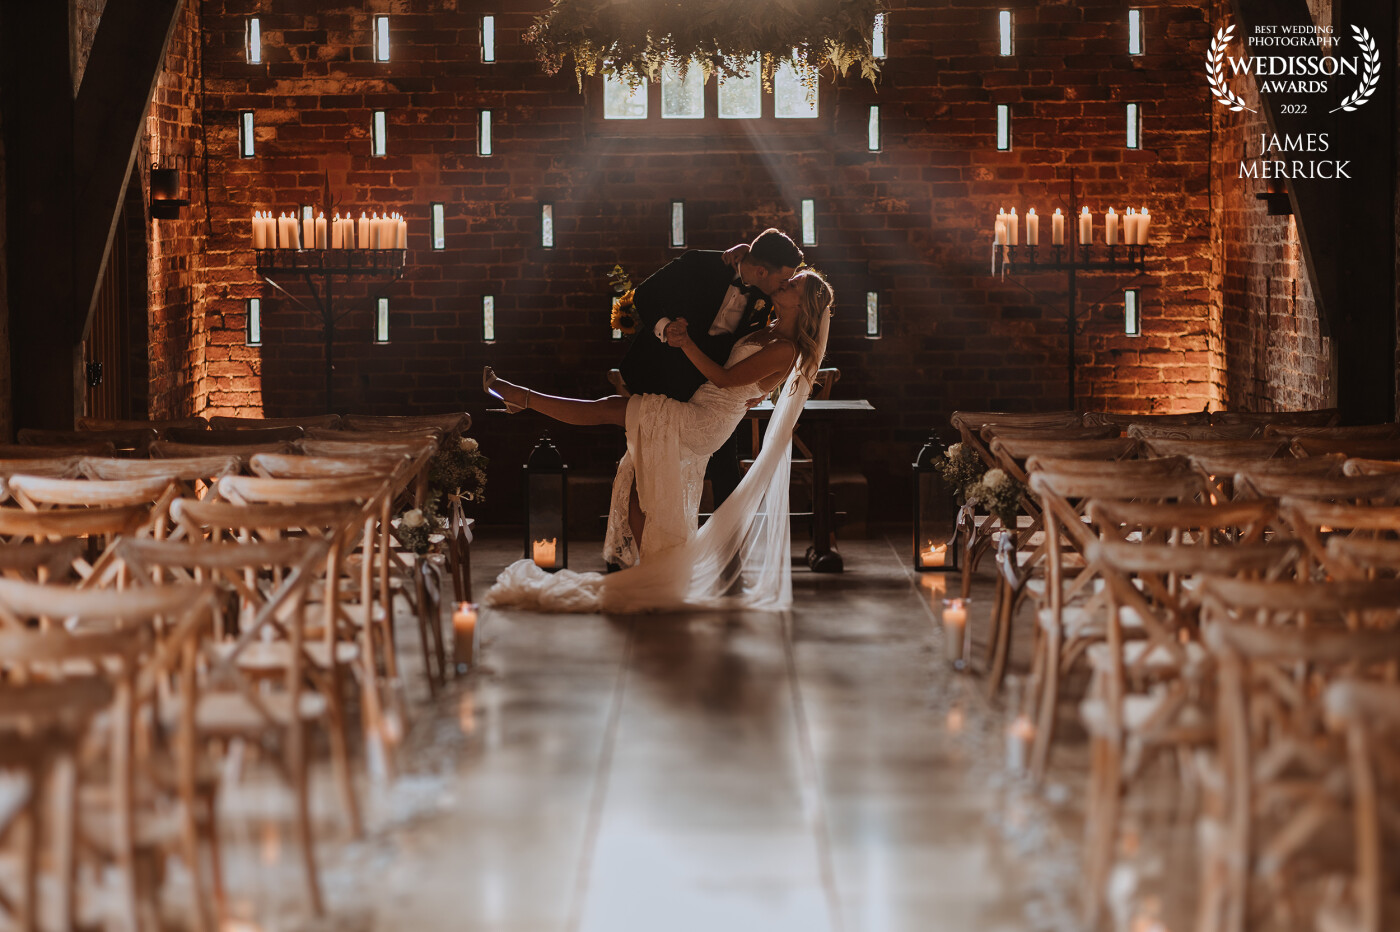 A classic kiss with Hollie & Callum in the main ceremony room at Grangefields in Derbyshire. The natural light pouring in through the windows was a huge bonus!